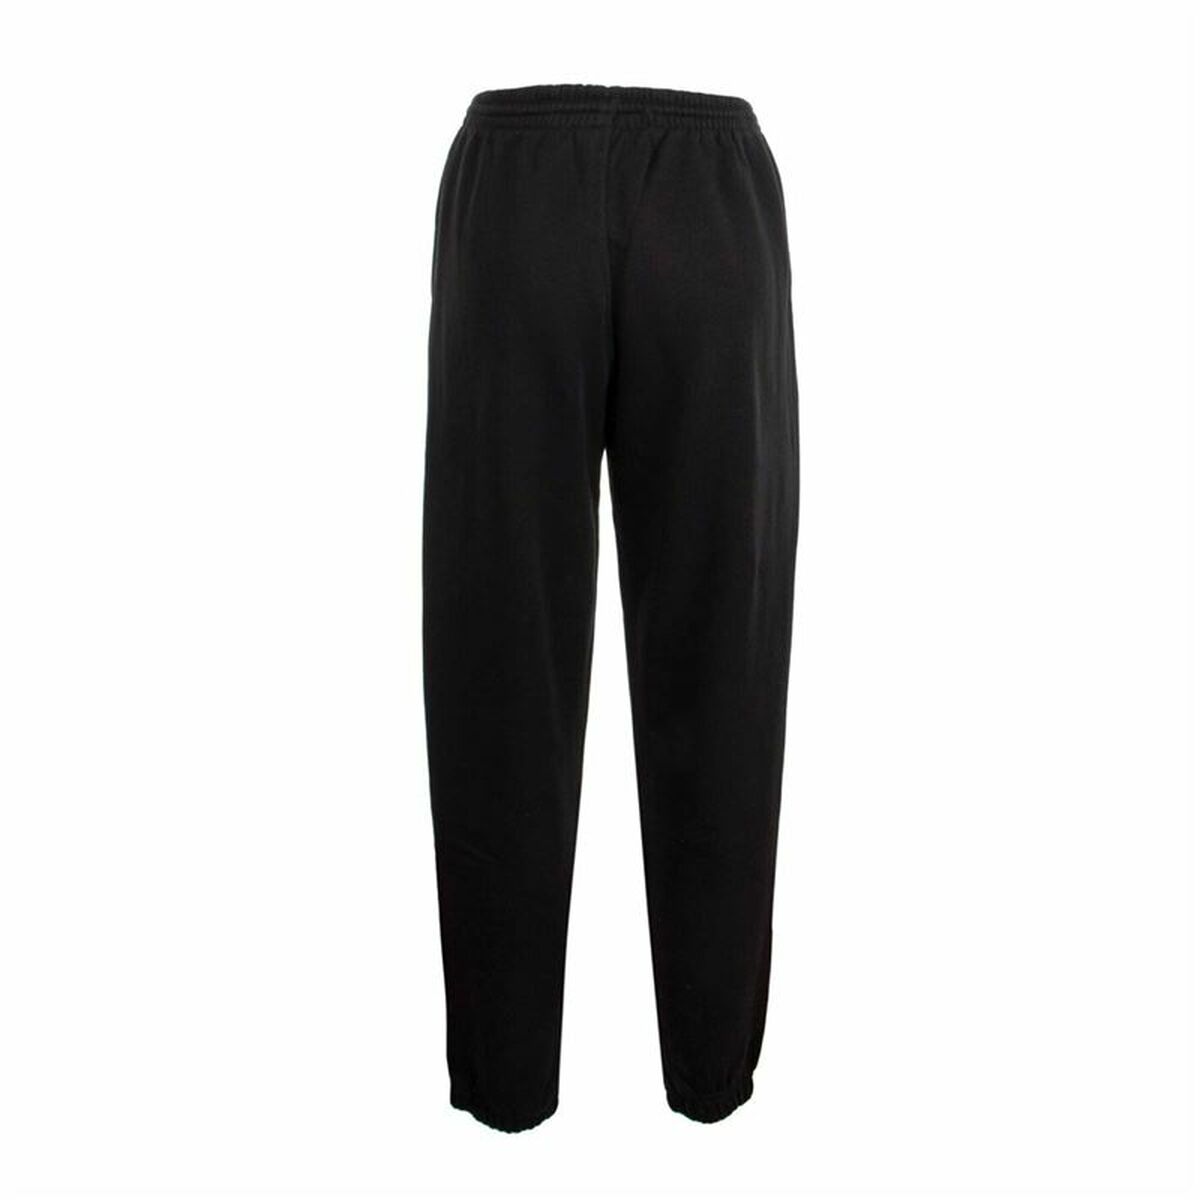 Long Sports Trousers Reebok Doorbuster Vector Graphic Lady Black